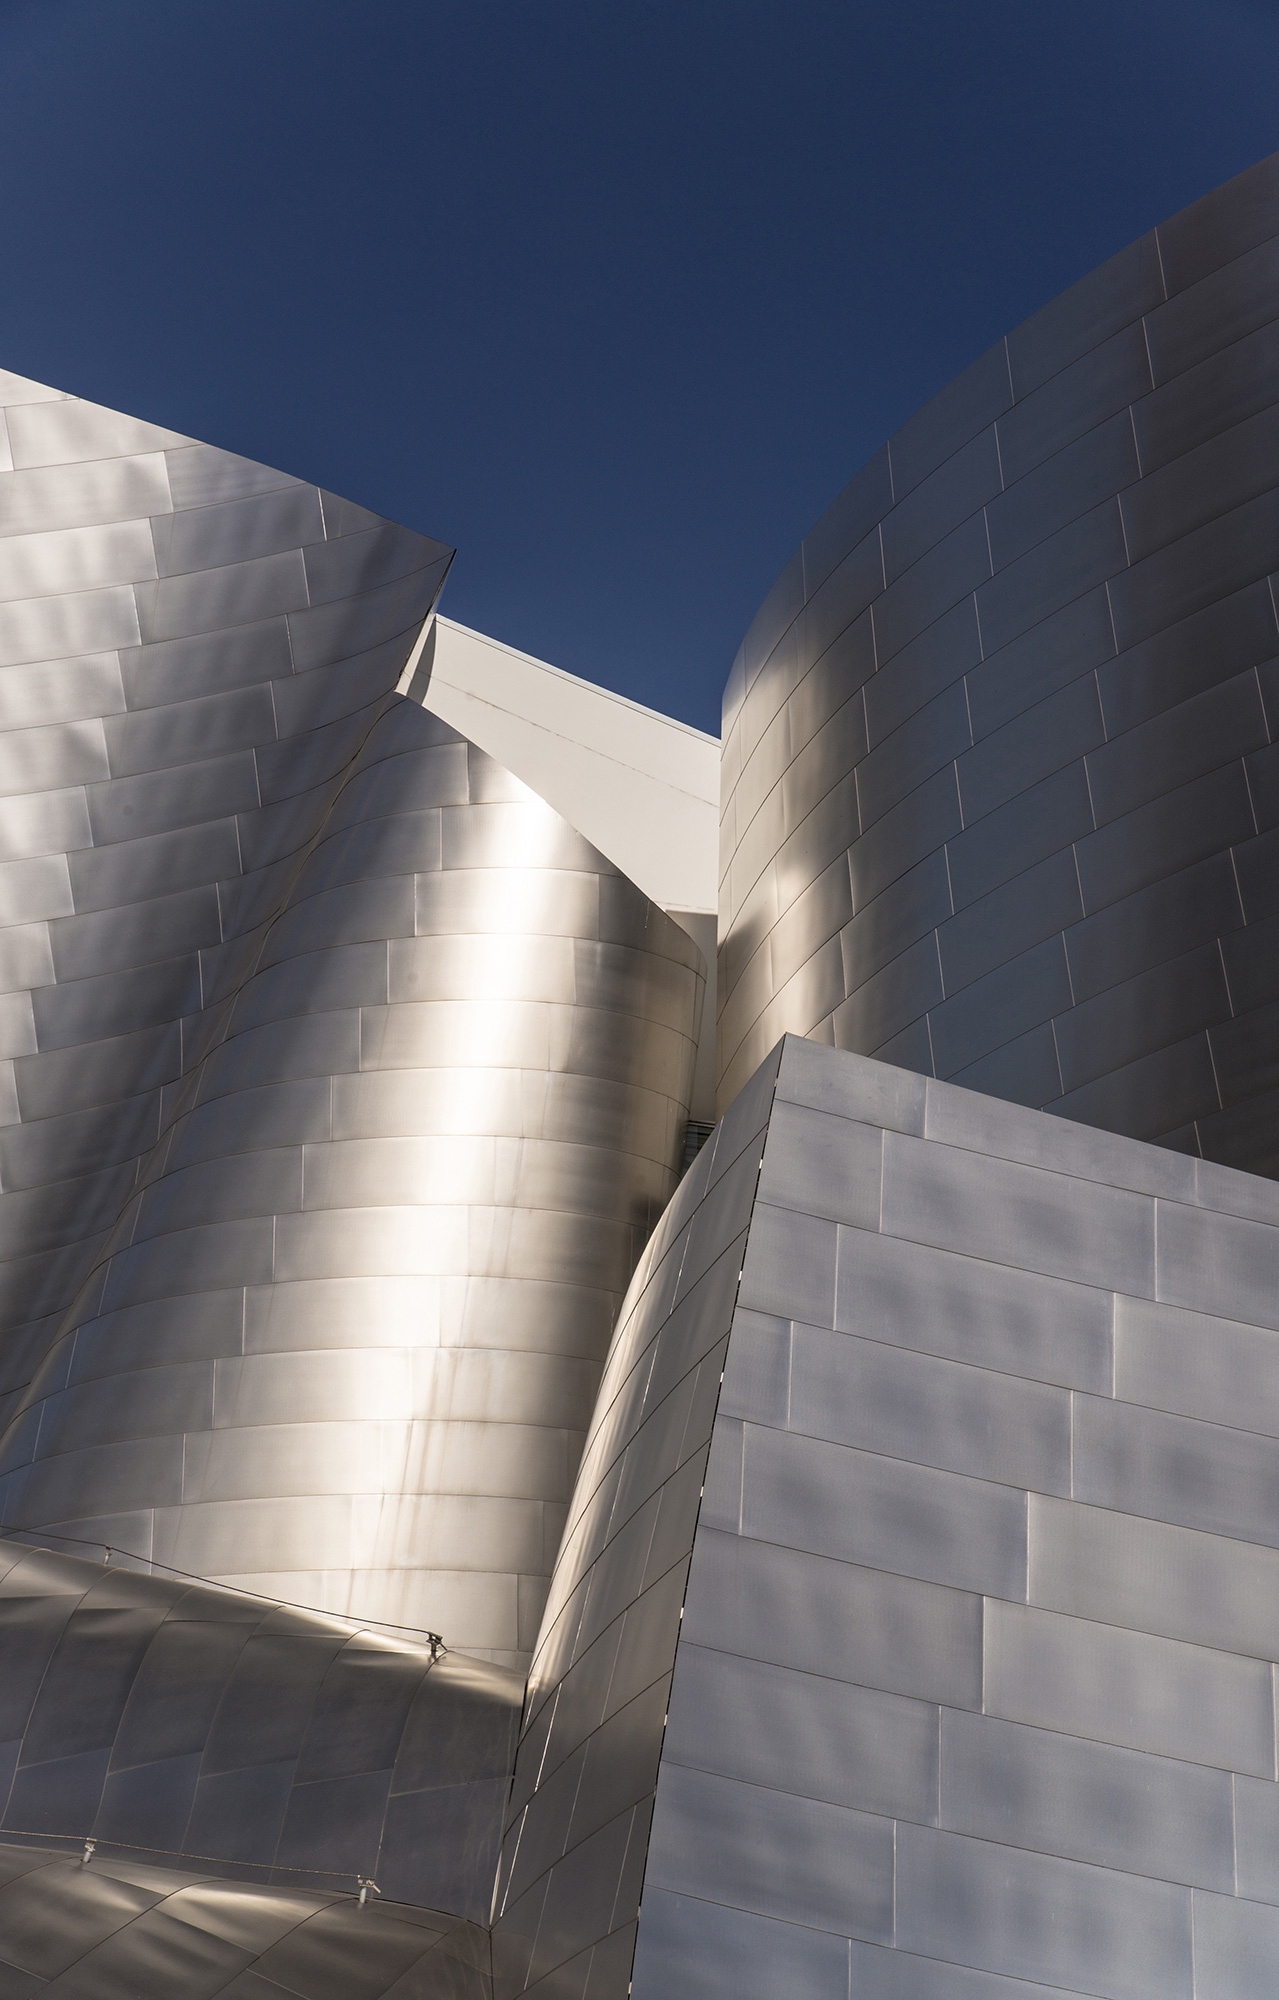 Walt Disney Concert Hall in Los Angeles, by architect Frank Gehry